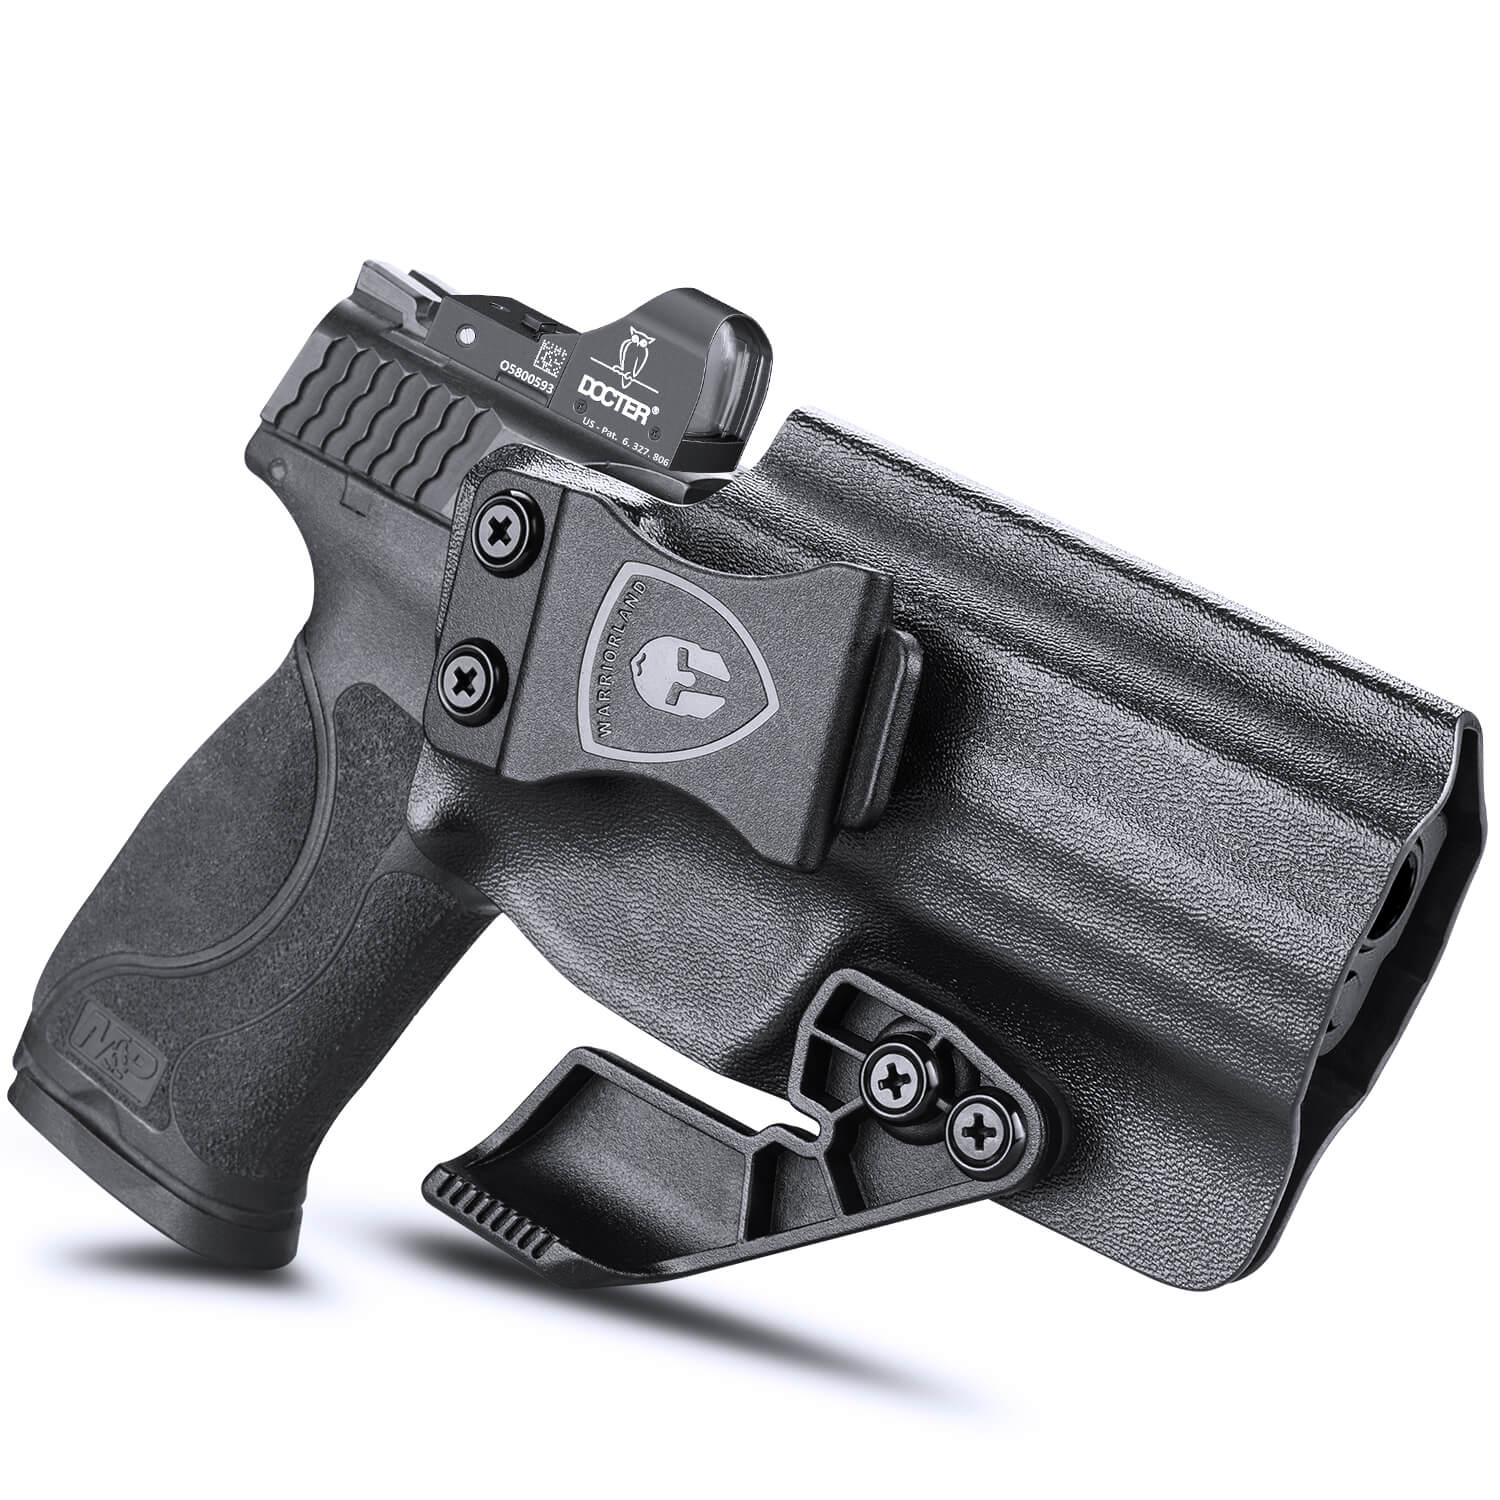 Smith & Wesson Kydex IWB Holster with Claw